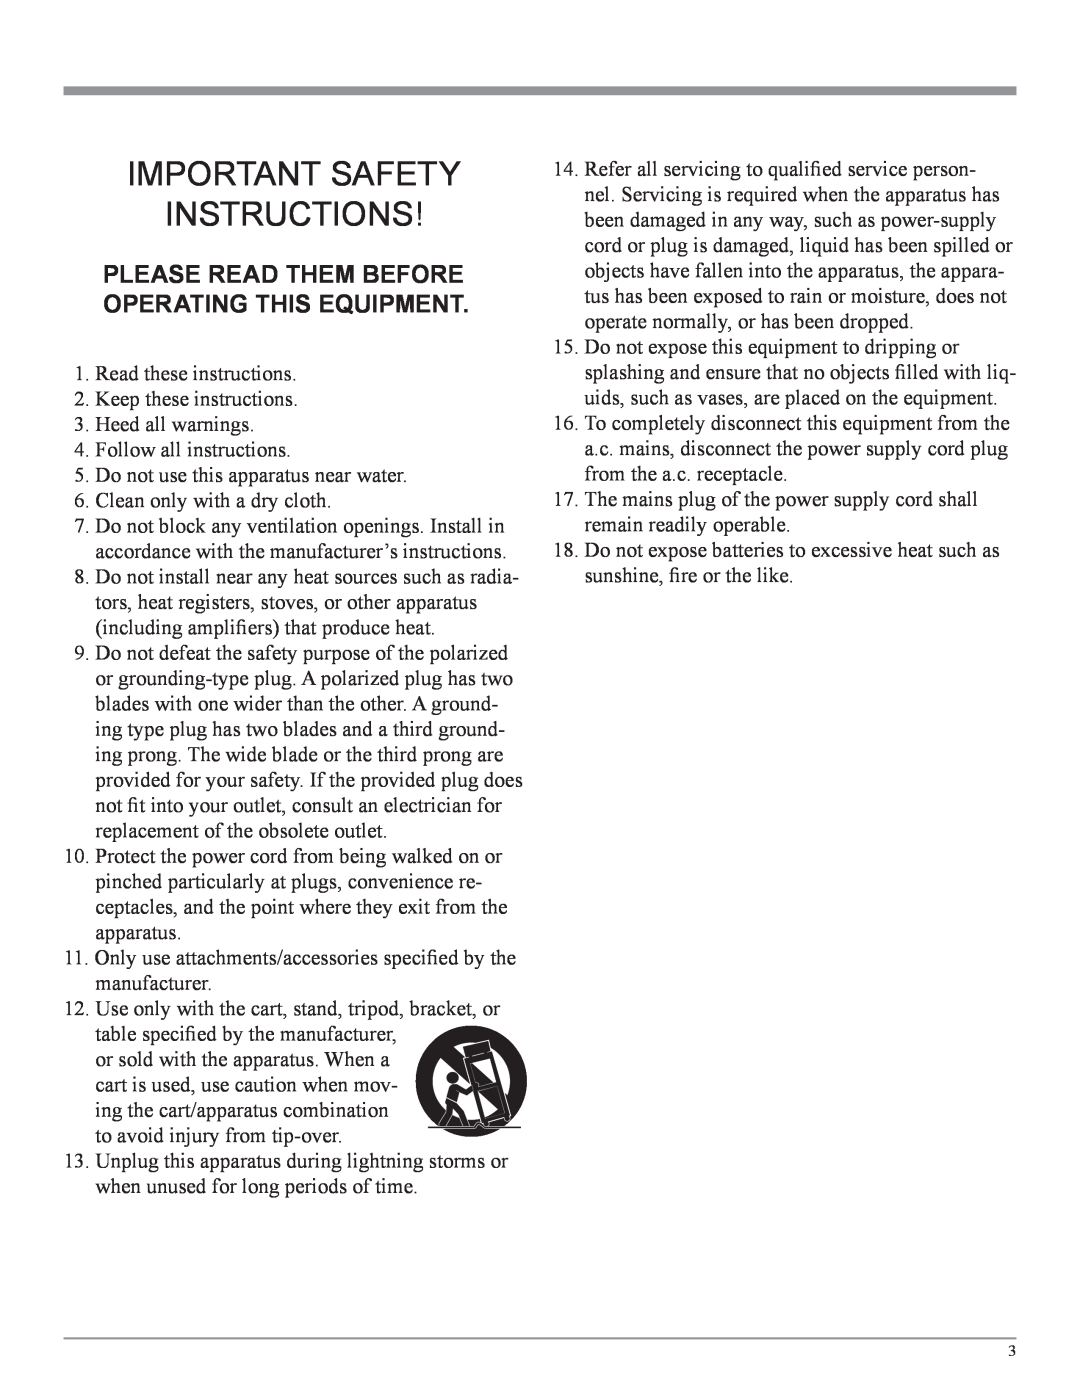 McIntosh MVP871 owner manual Important Safety Instructions, Please Read Them Before Operating This Equipment 